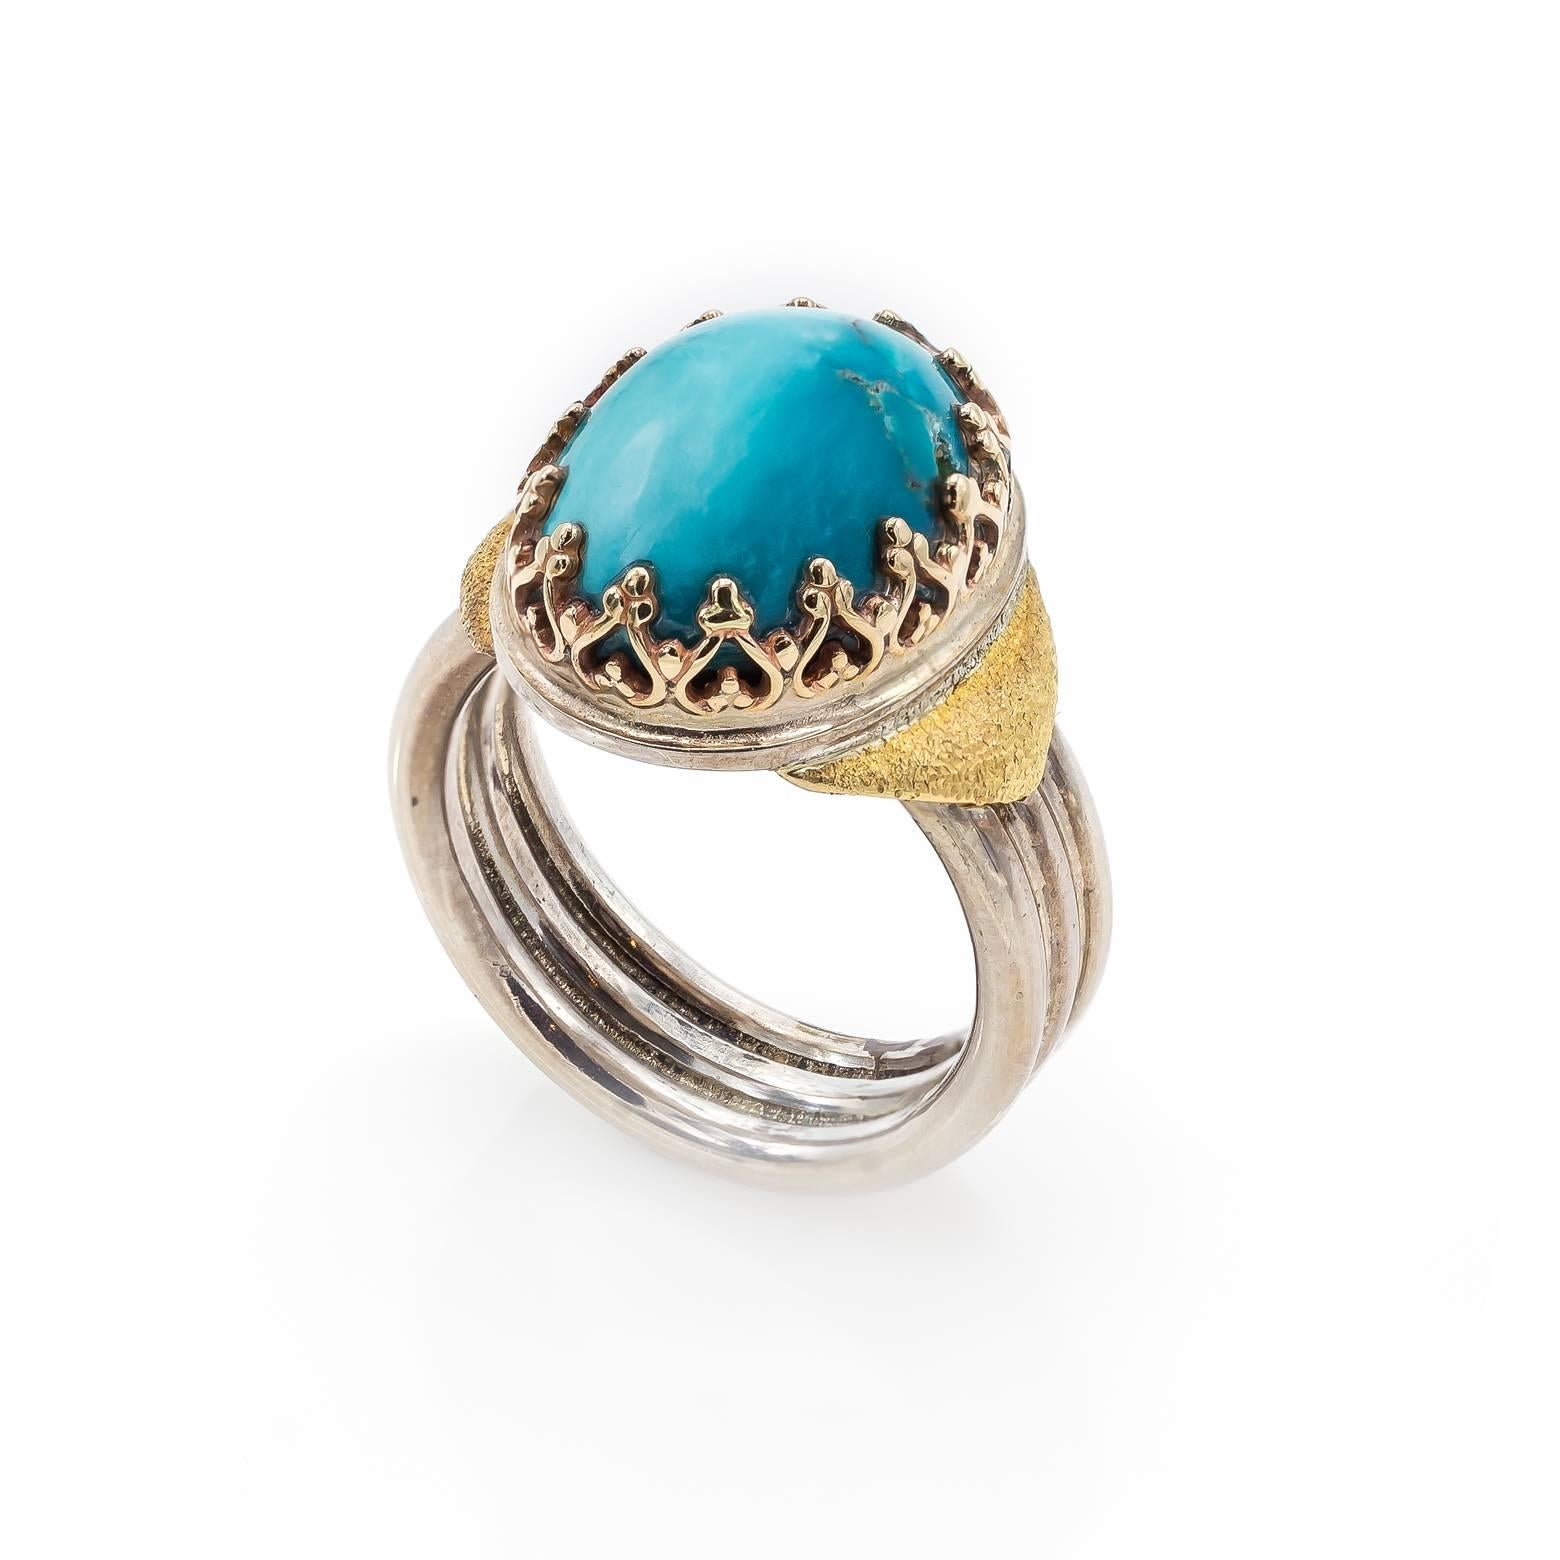 This large sky blue oval turquoise cabochon ring is decorated with a lace-like 14K yellow gold bezel and a three ridge sterling silver band. A substantial piece with many shades of turquoise ranging from ethereal to deep Caribbean Blue. 